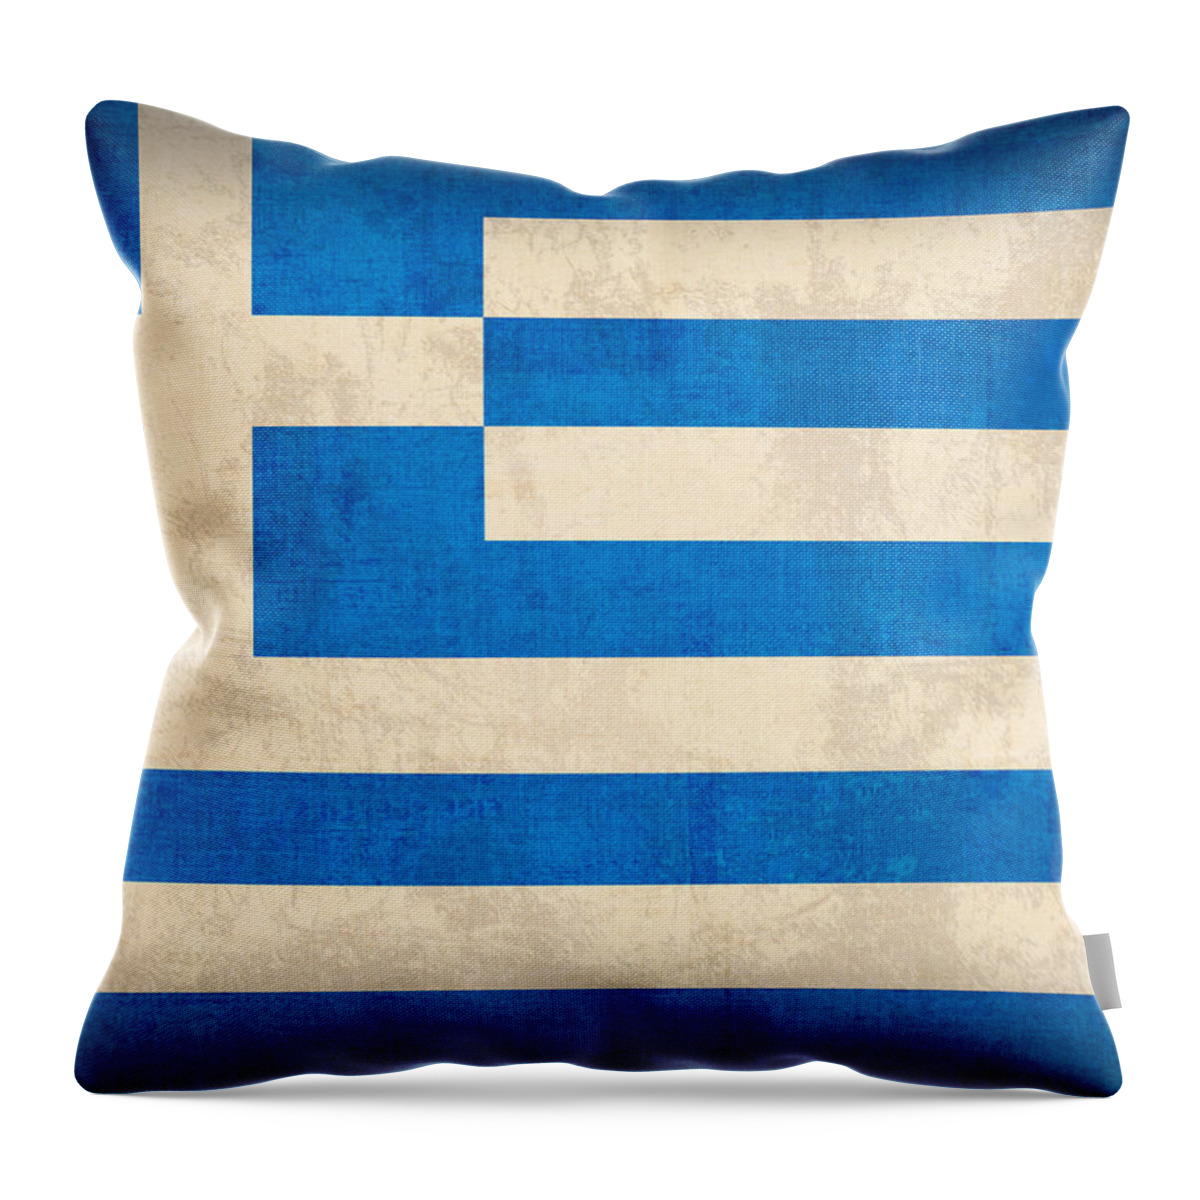 Greece Greek Athen Hellenic Ruins Acropolis Flag Vintage Distressed Finish Throw Pillow featuring the mixed media Greece Flag Vintage Distressed Finish by Design Turnpike